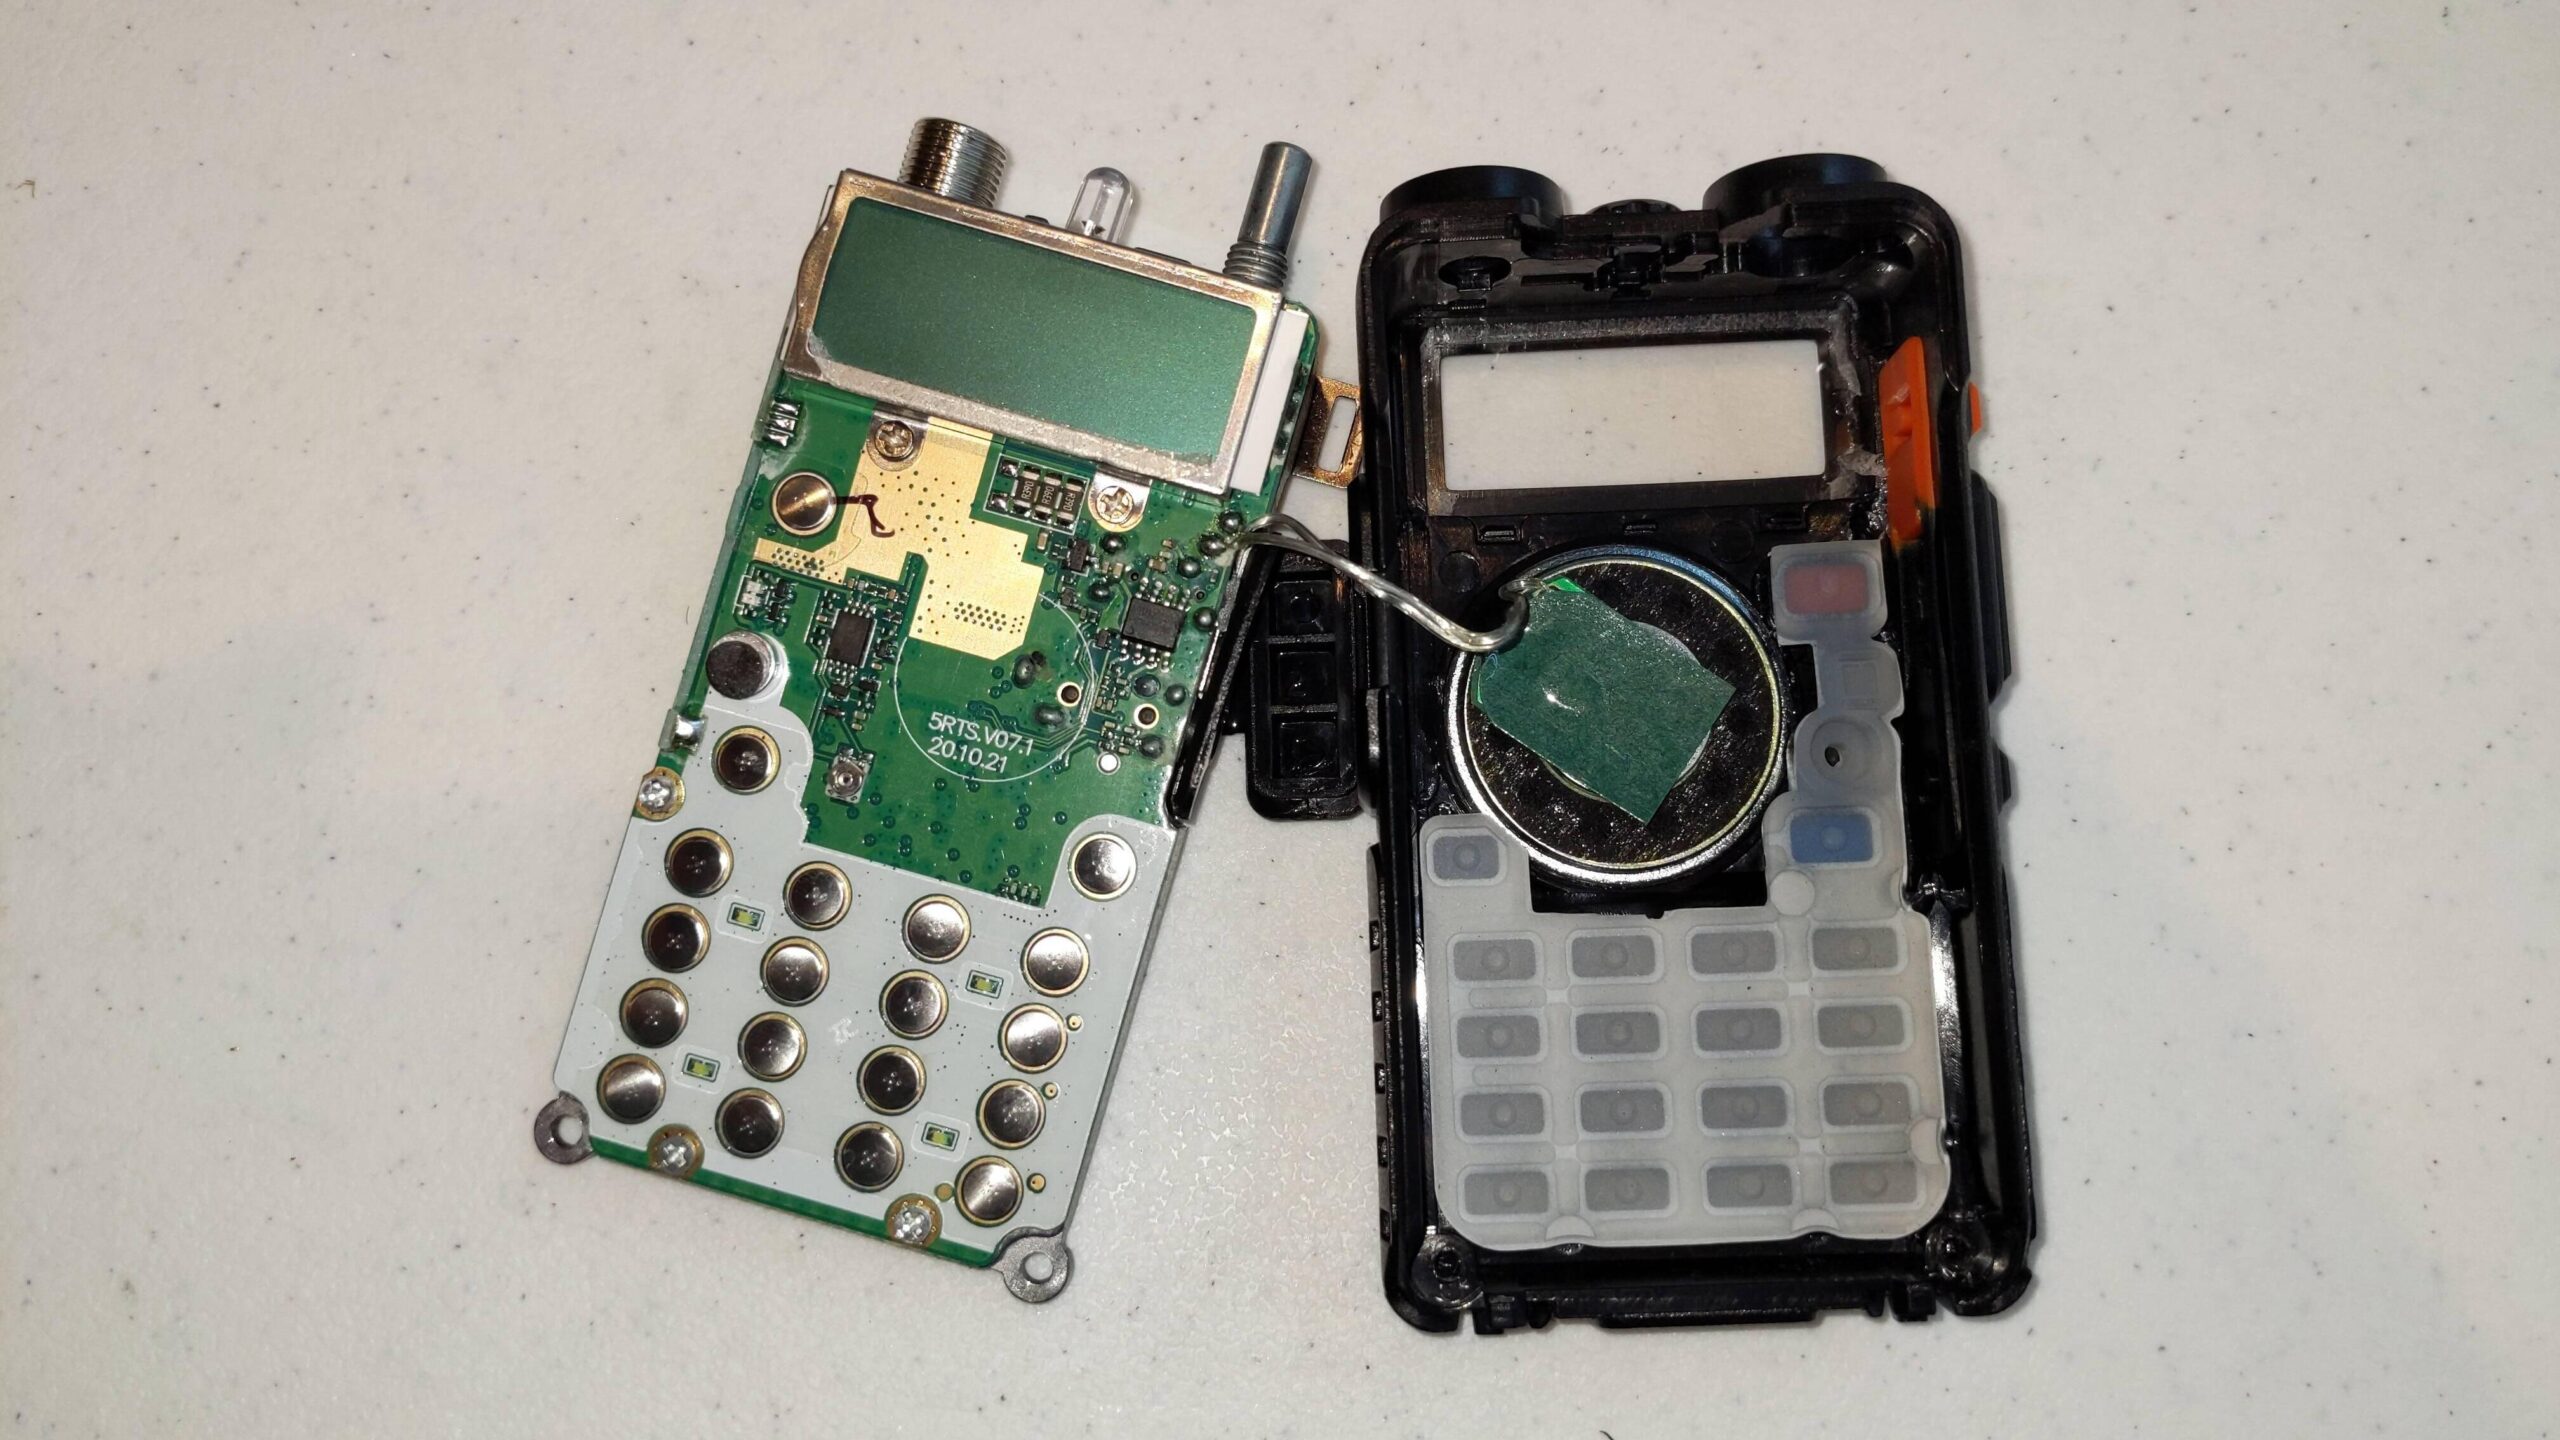 Baofeng UV5R, with internals removed from shell